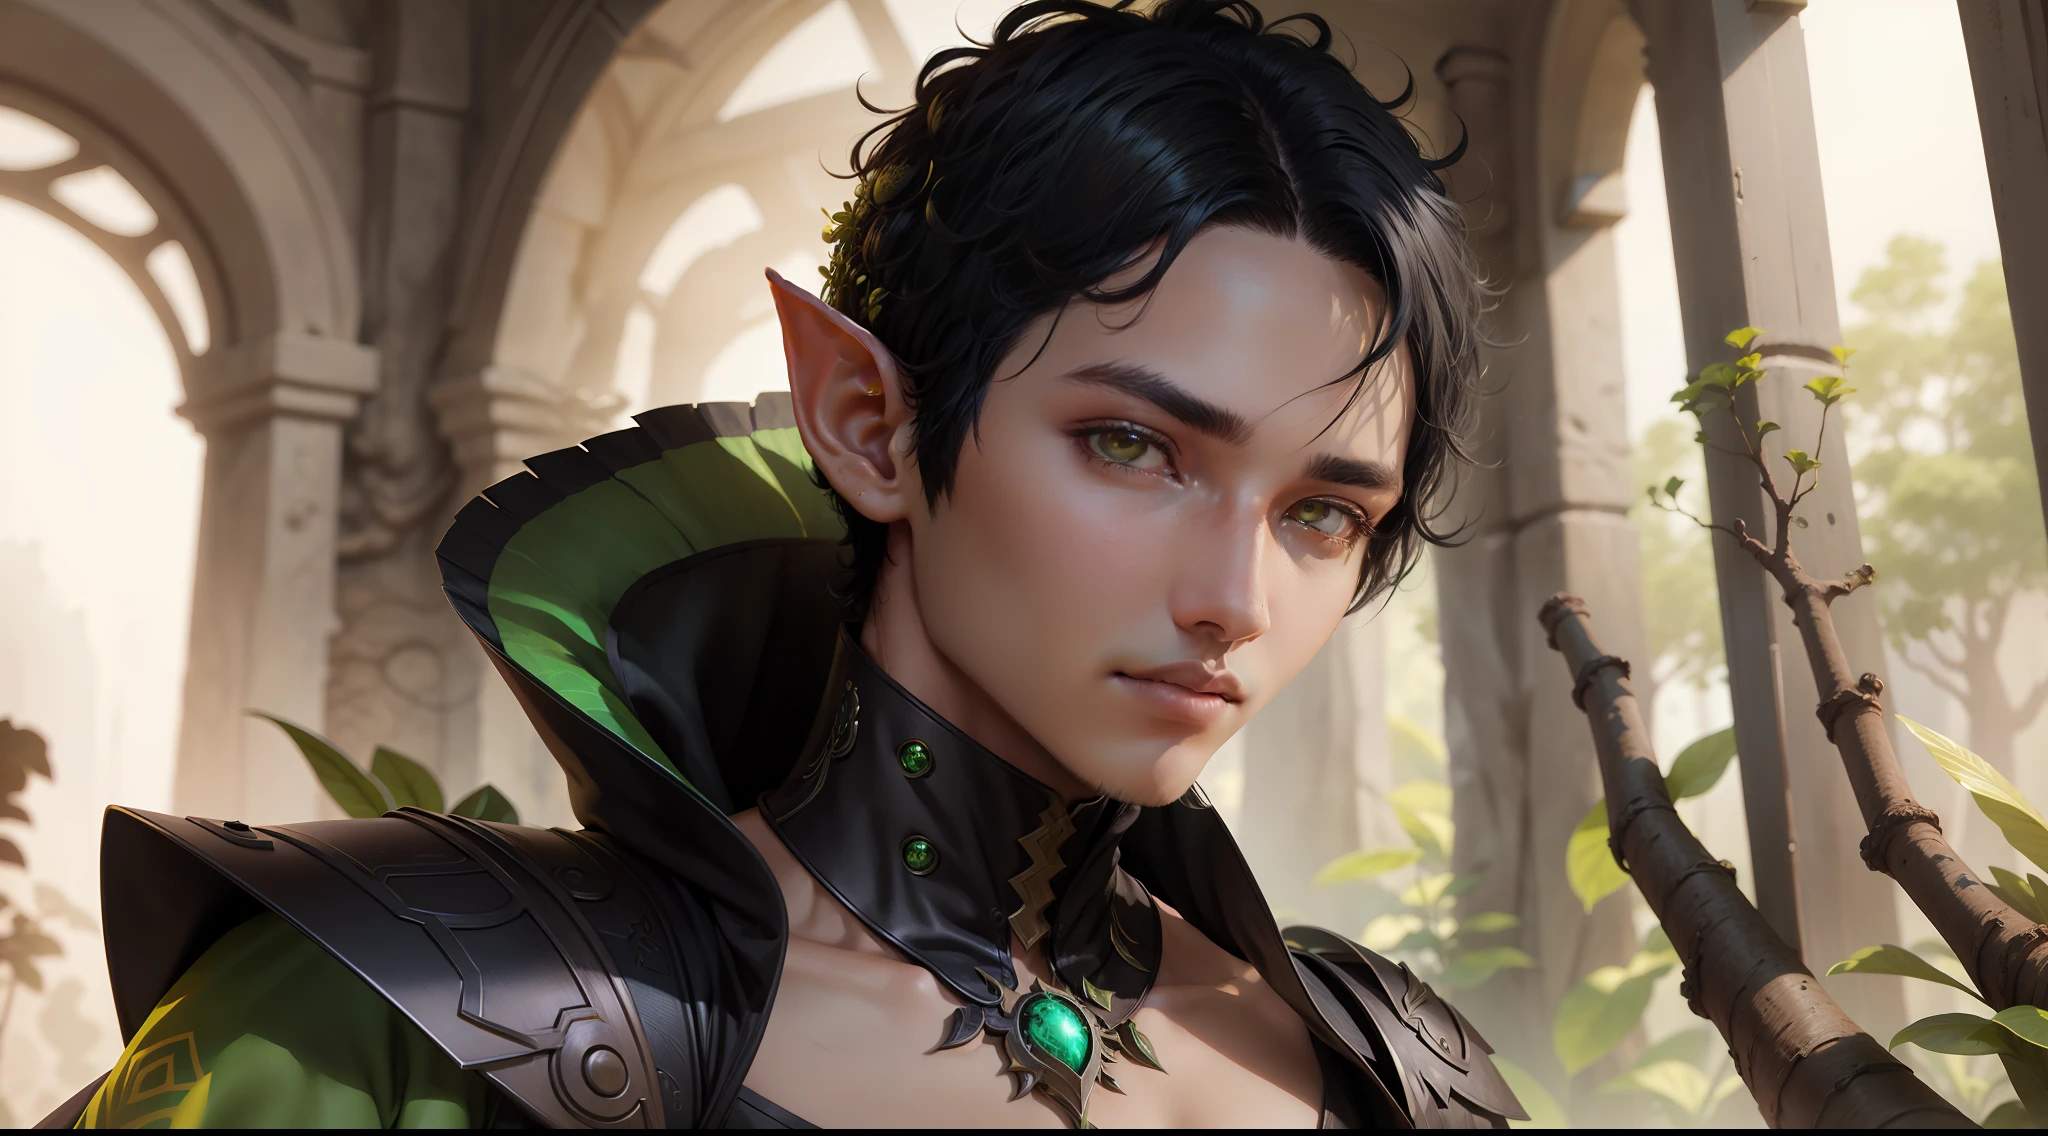 Enhance the quality and resolution of the portrait of a magical plant elf man with short black hair and yellow eyes in a futuristic style.